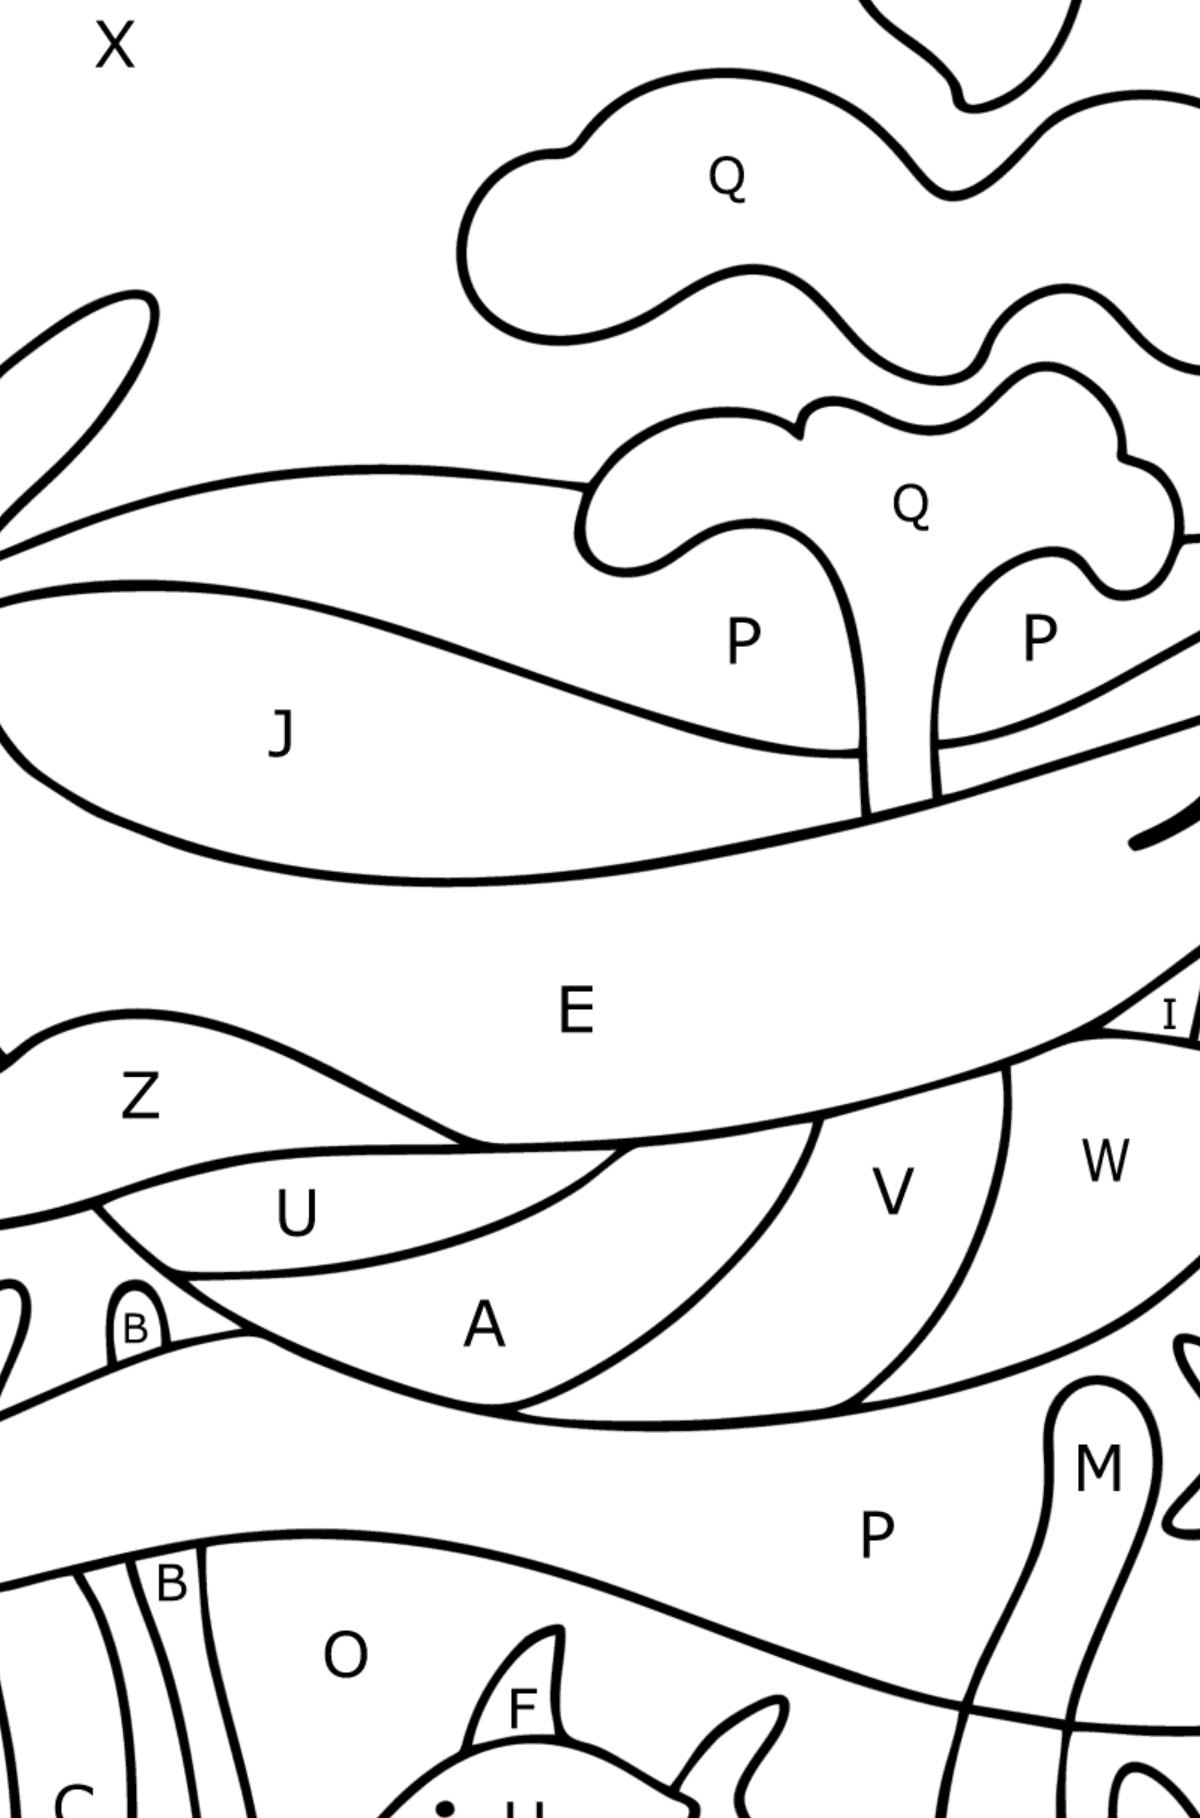 Cute sperm whale coloring page - Coloring by Letters for Kids